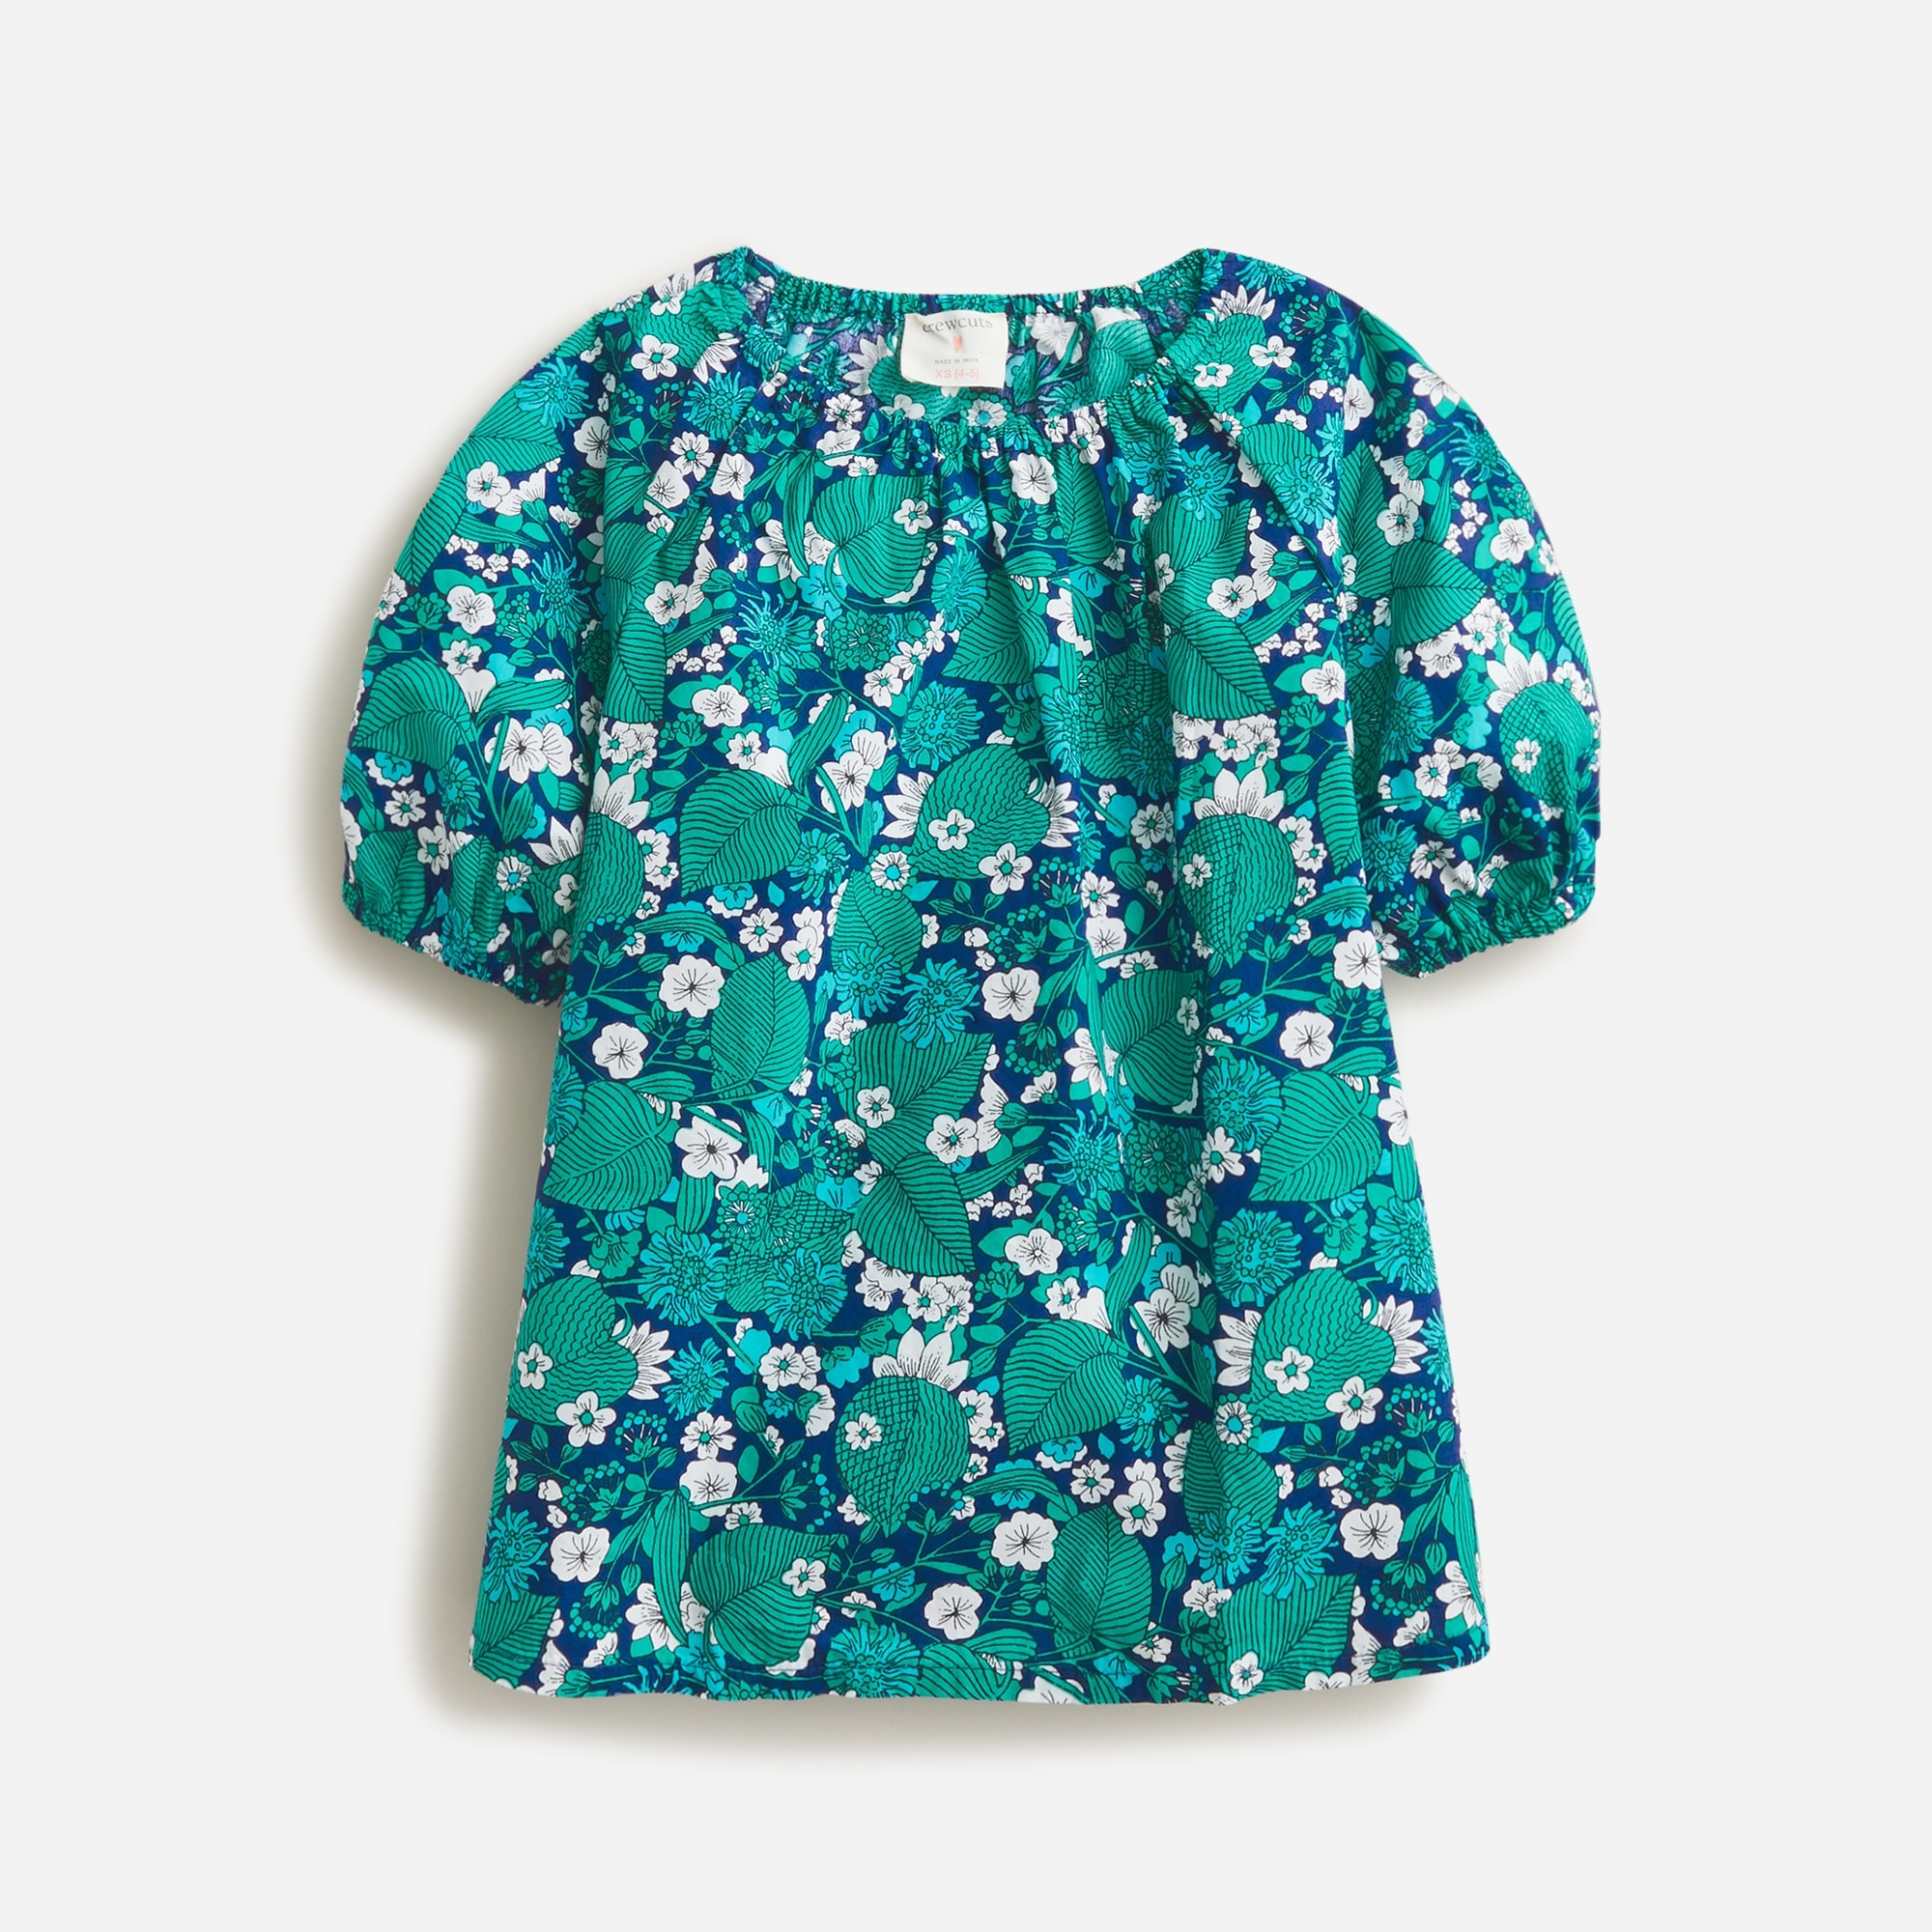 Jcrew Girls puff-sleeve top in emerald forest floral